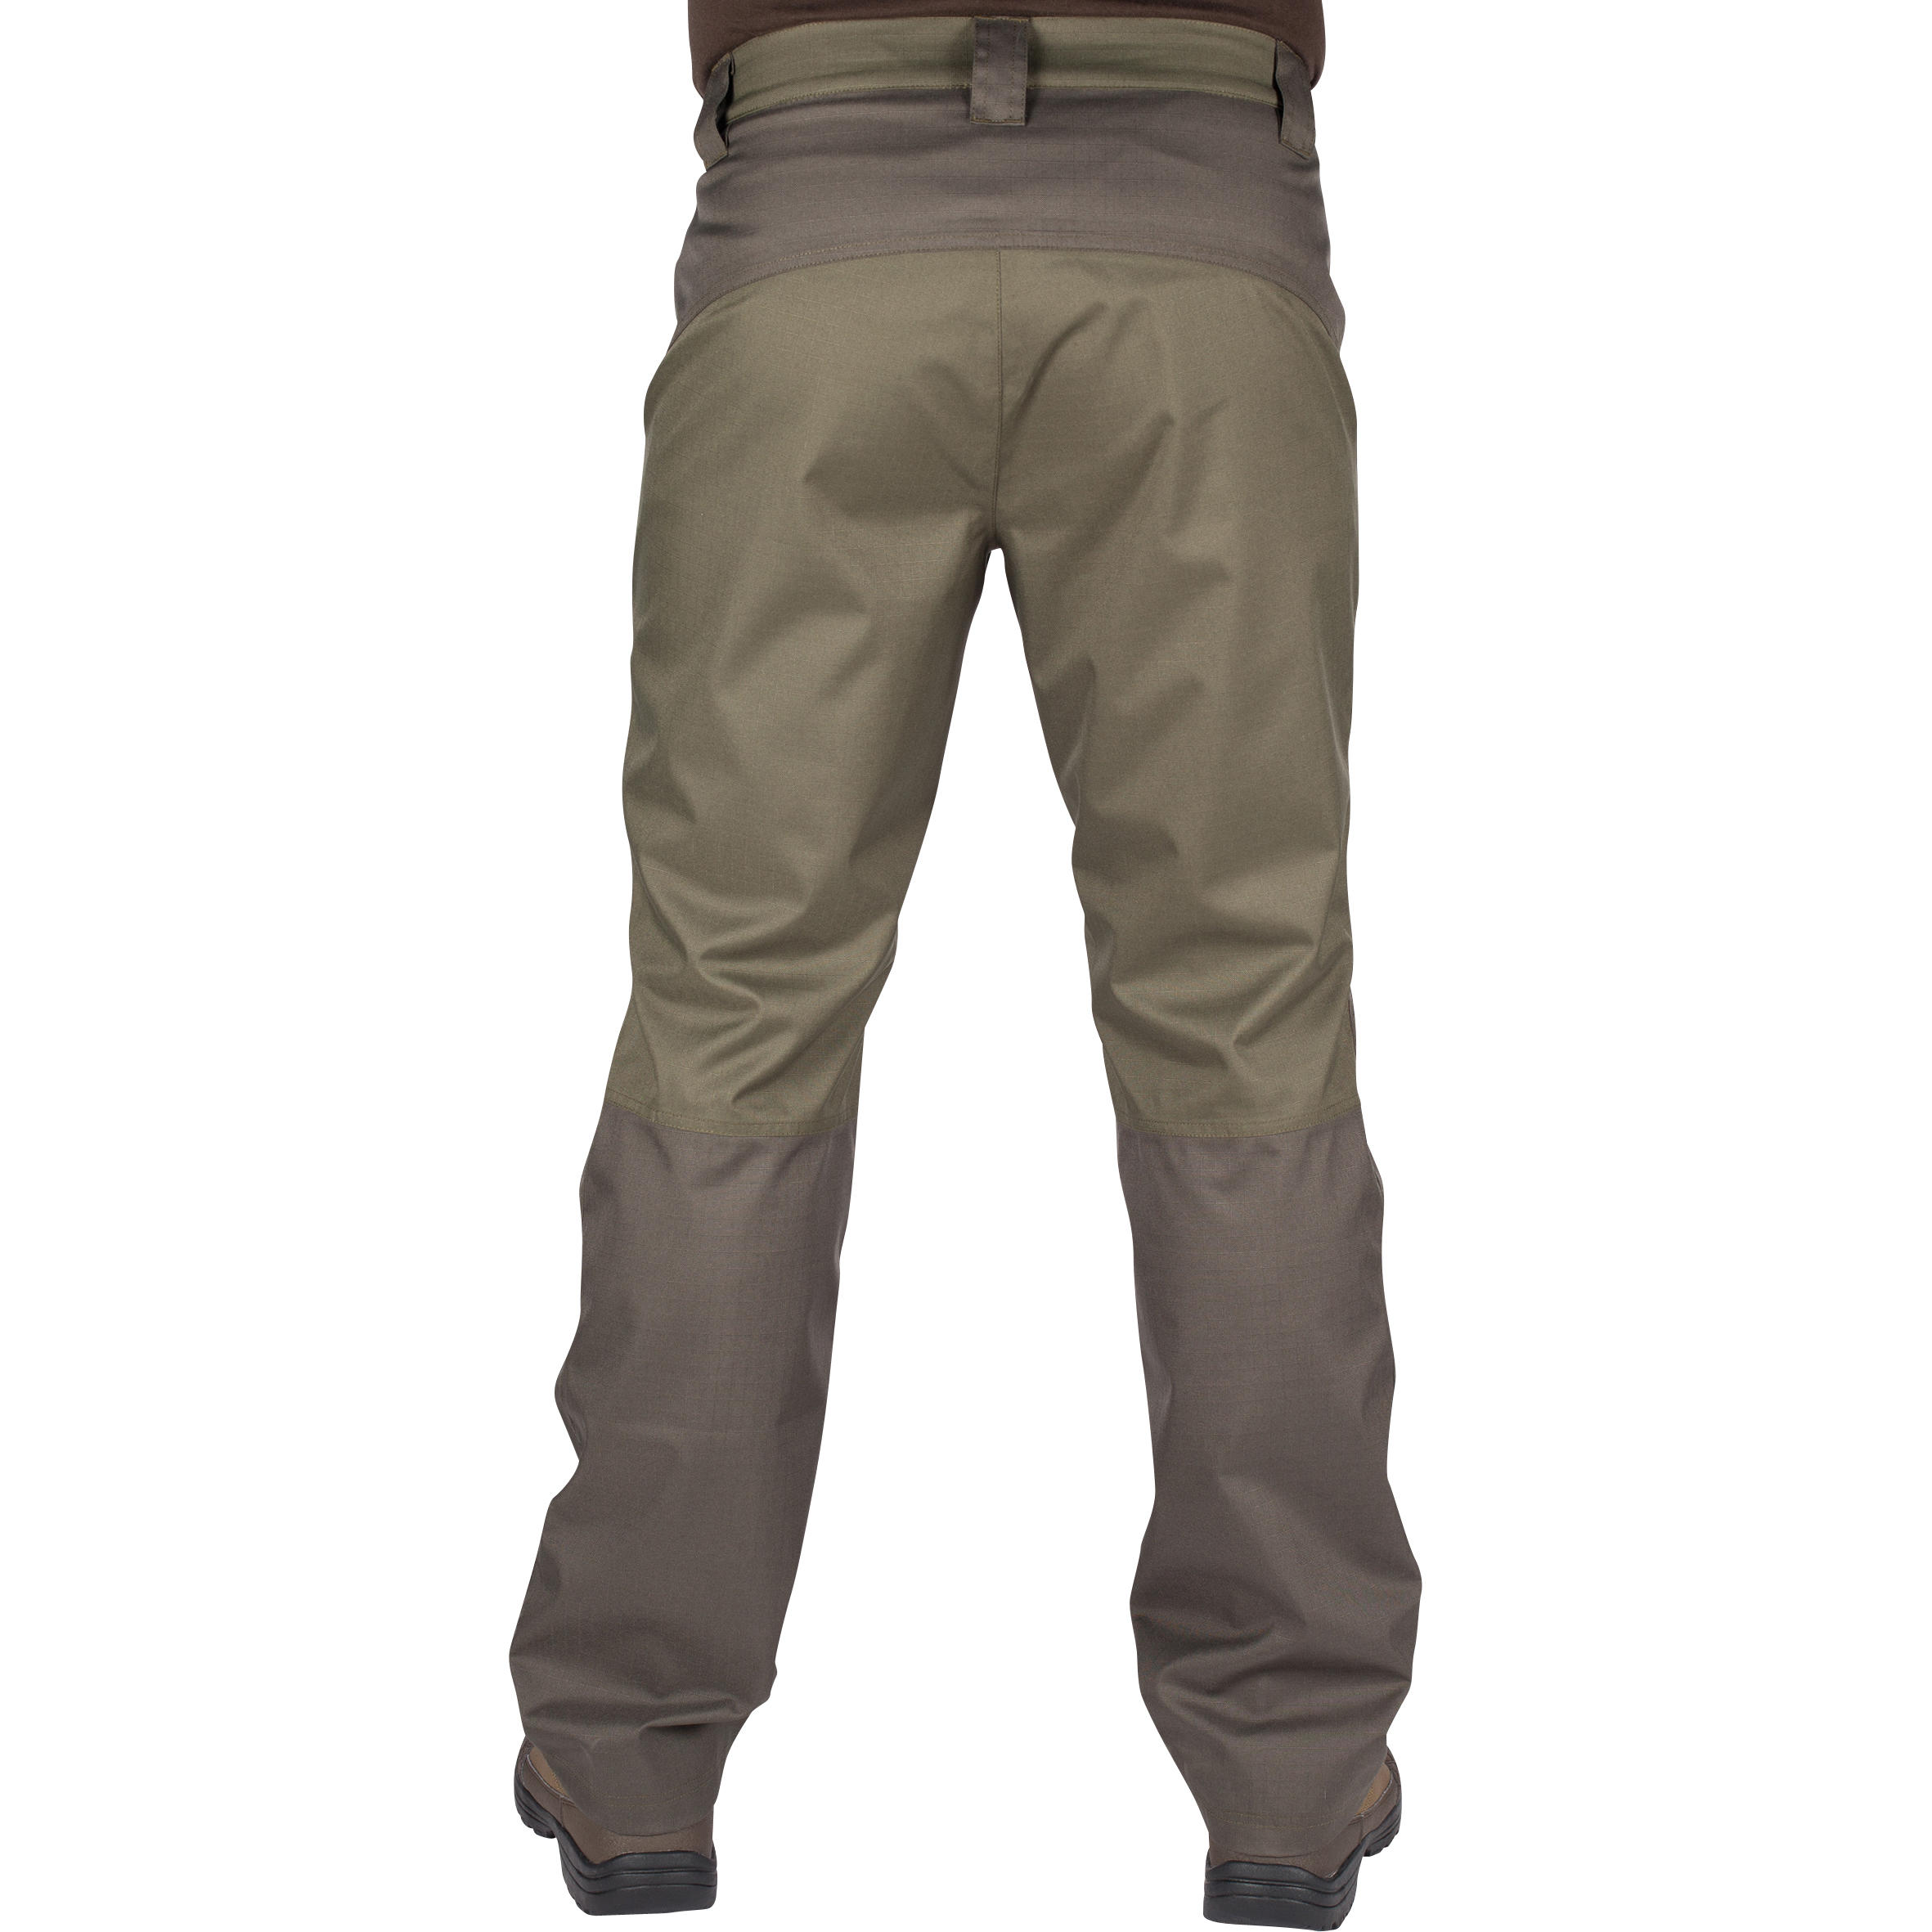 Men's Breathable Trousers Pants 900 Green